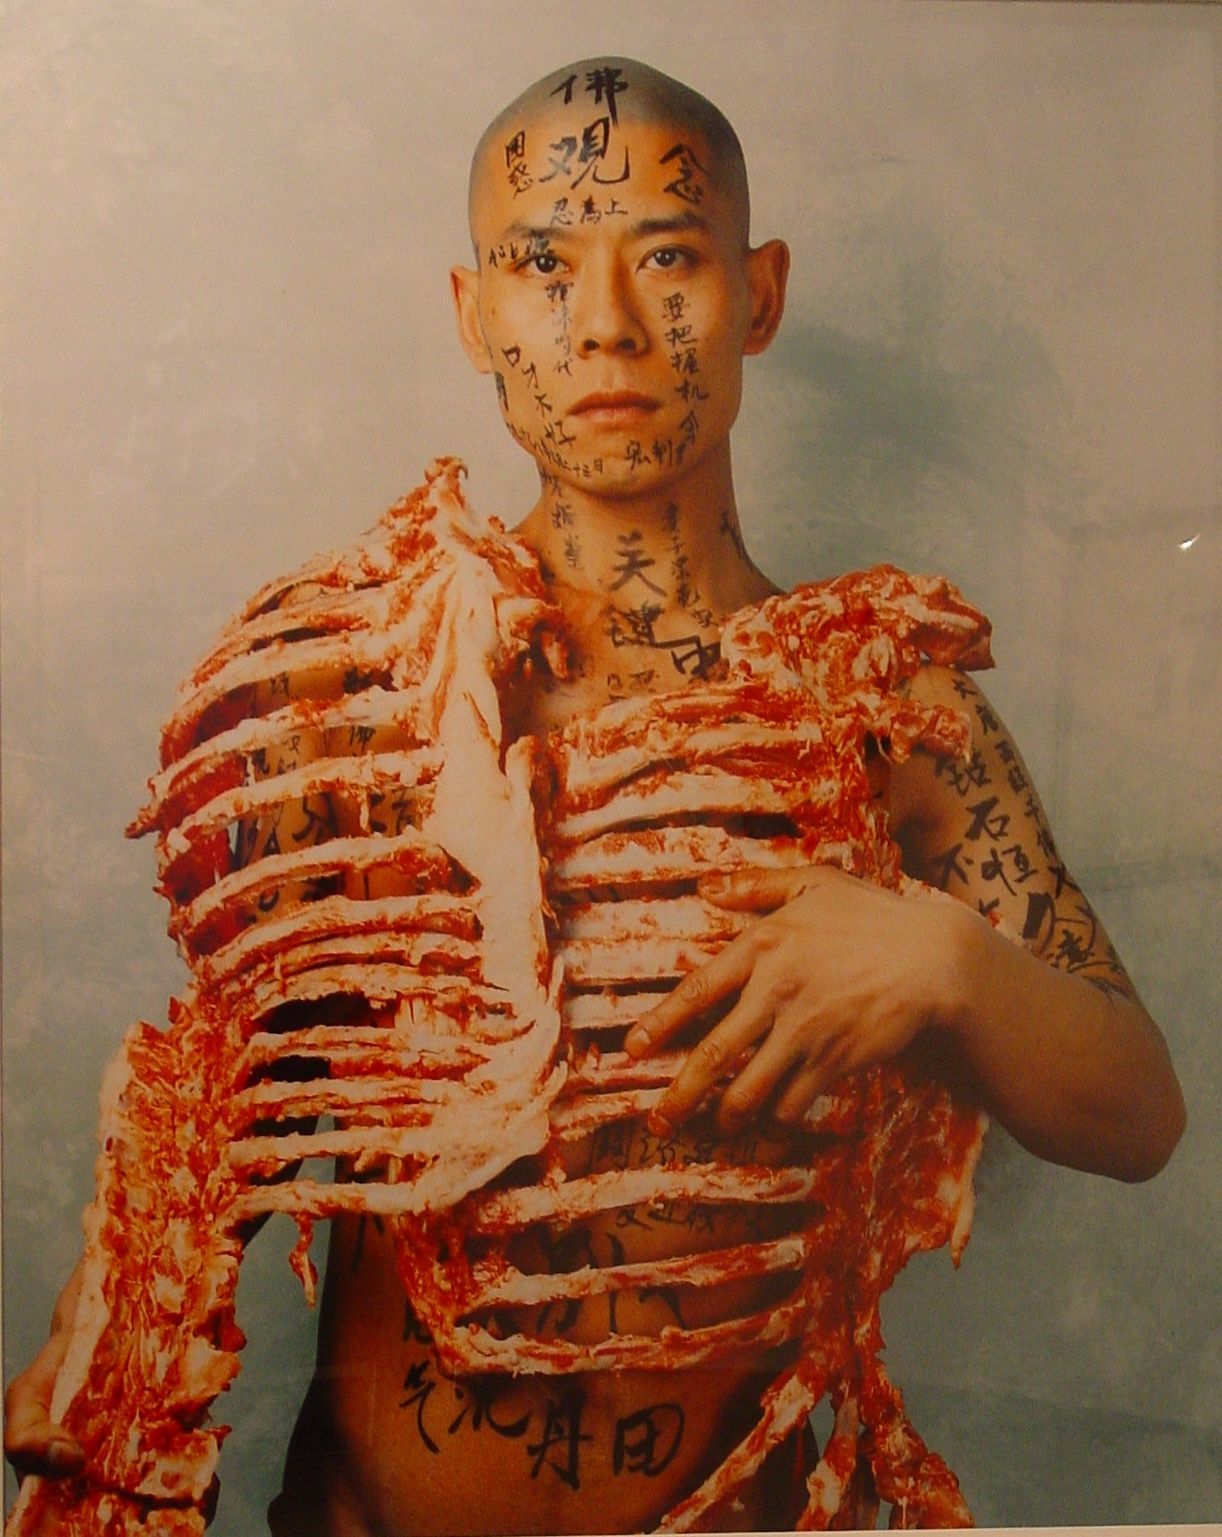 Zhang Huan, Meat and text, 1998